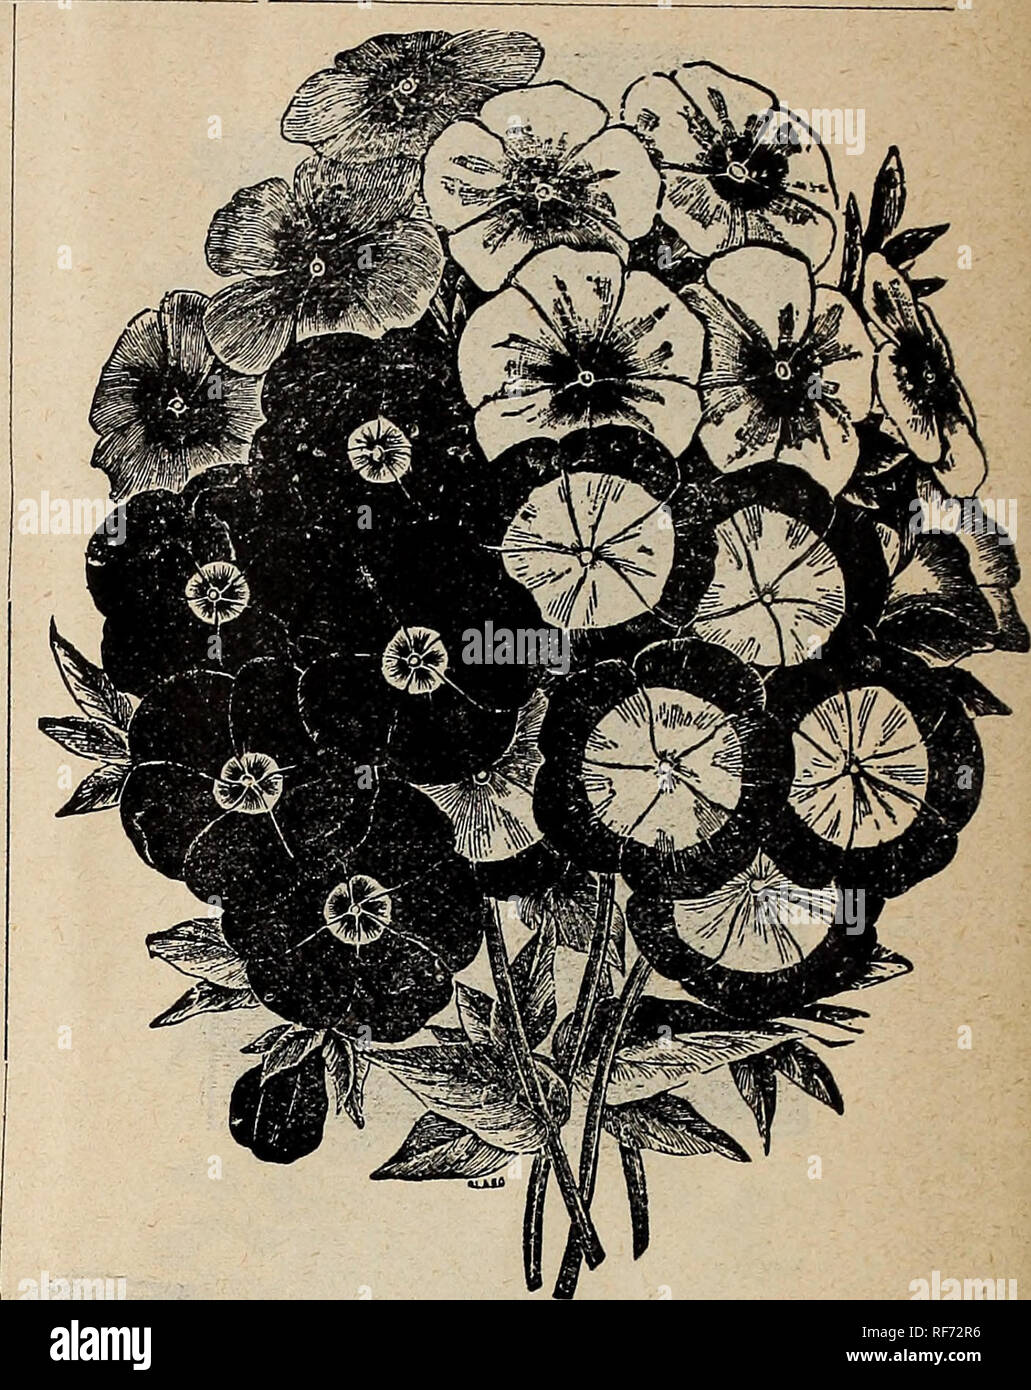 . Wm. Ewing &amp; Co.'s seed catalogue. Nursery stock Que?bec (Province) Montre?al Catalogs; Vegetables Seeds Catalogs; Grasses Seeds Catalogs; Flowers Seeds Catalogs; Plants, Ornamental Catalogs; Agricultural implements Catalogs. White Swan Poppy. No. 353, page 61. Petunia. Pkfcts. 322. Fine Mixed 5 323. Choice Mixed—Very fine .. .. 10 324- Hybrida Grandiflora—A mixture of the choicest single named sorts, producing all show flowers .. 25 325. Giants of California—Mixed Colors- • 25 Are often 4 and 5 ins. across and of every conceivable shade of crimson, pink, white, lavender, etc., with wide  Stock Photo